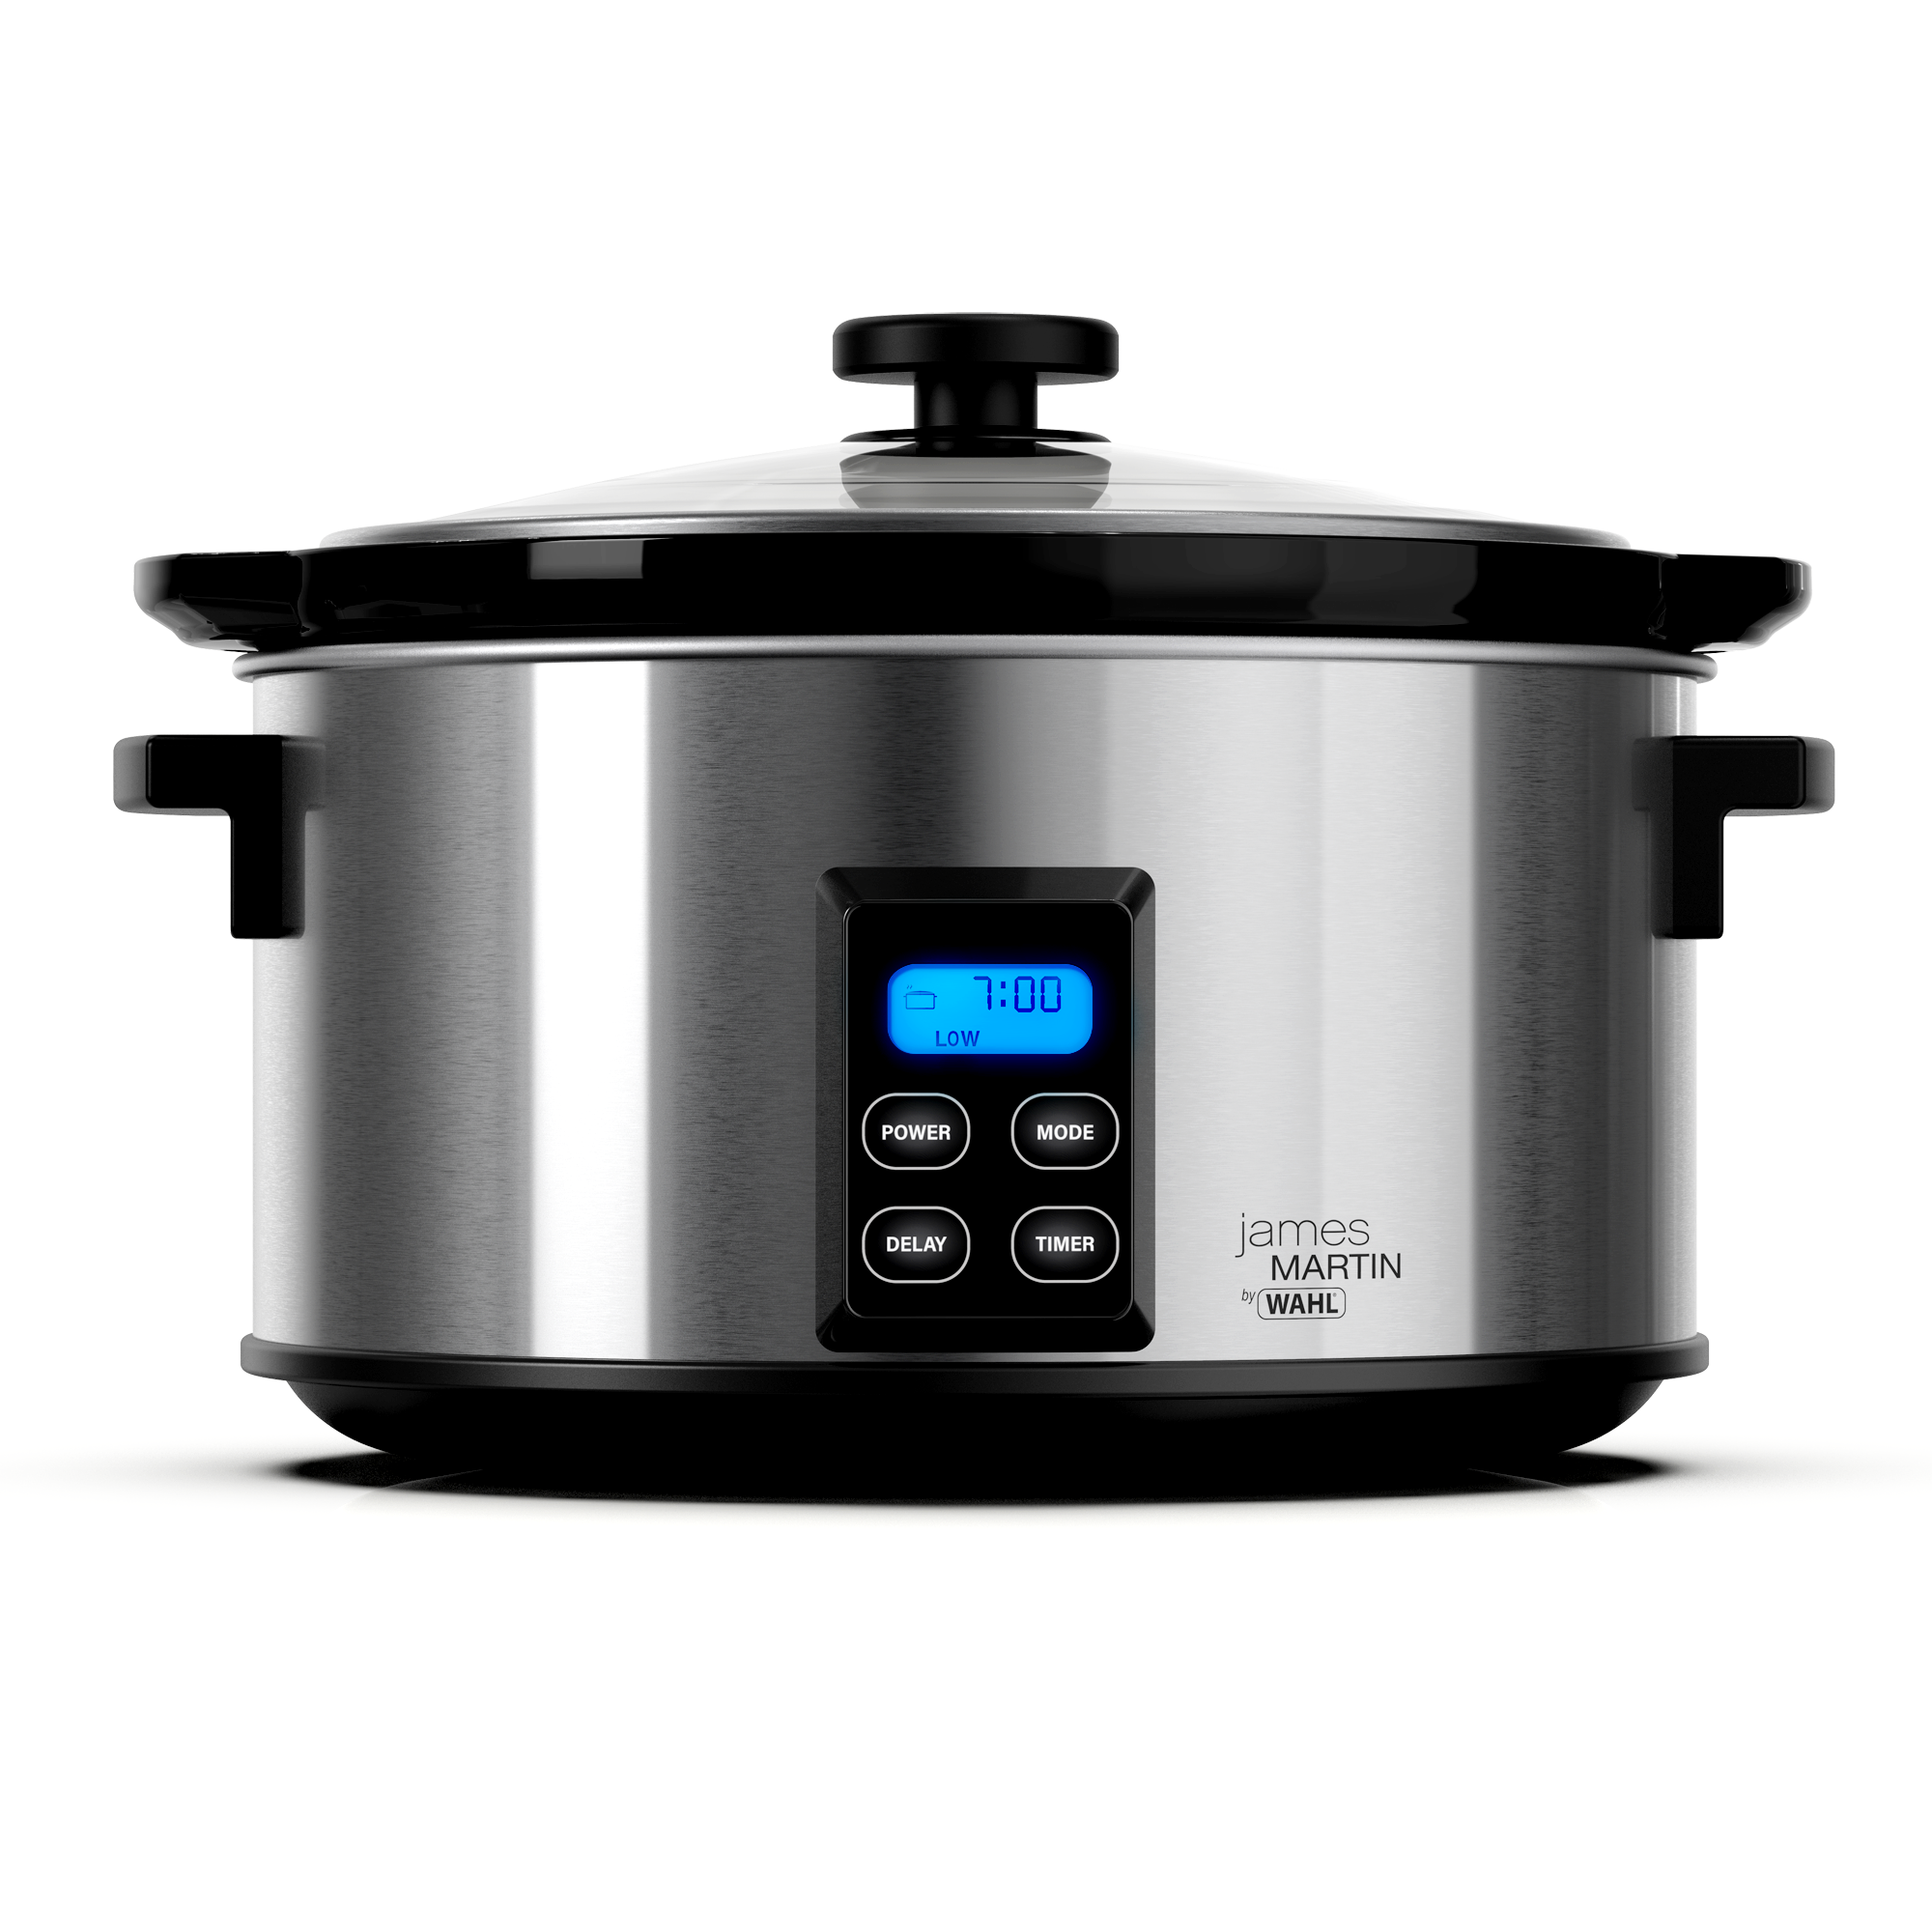 https://www.wahl.co.uk/wp-content/uploads/2018/08/ZX929-Digital-Slow-Cooker-High-png.png